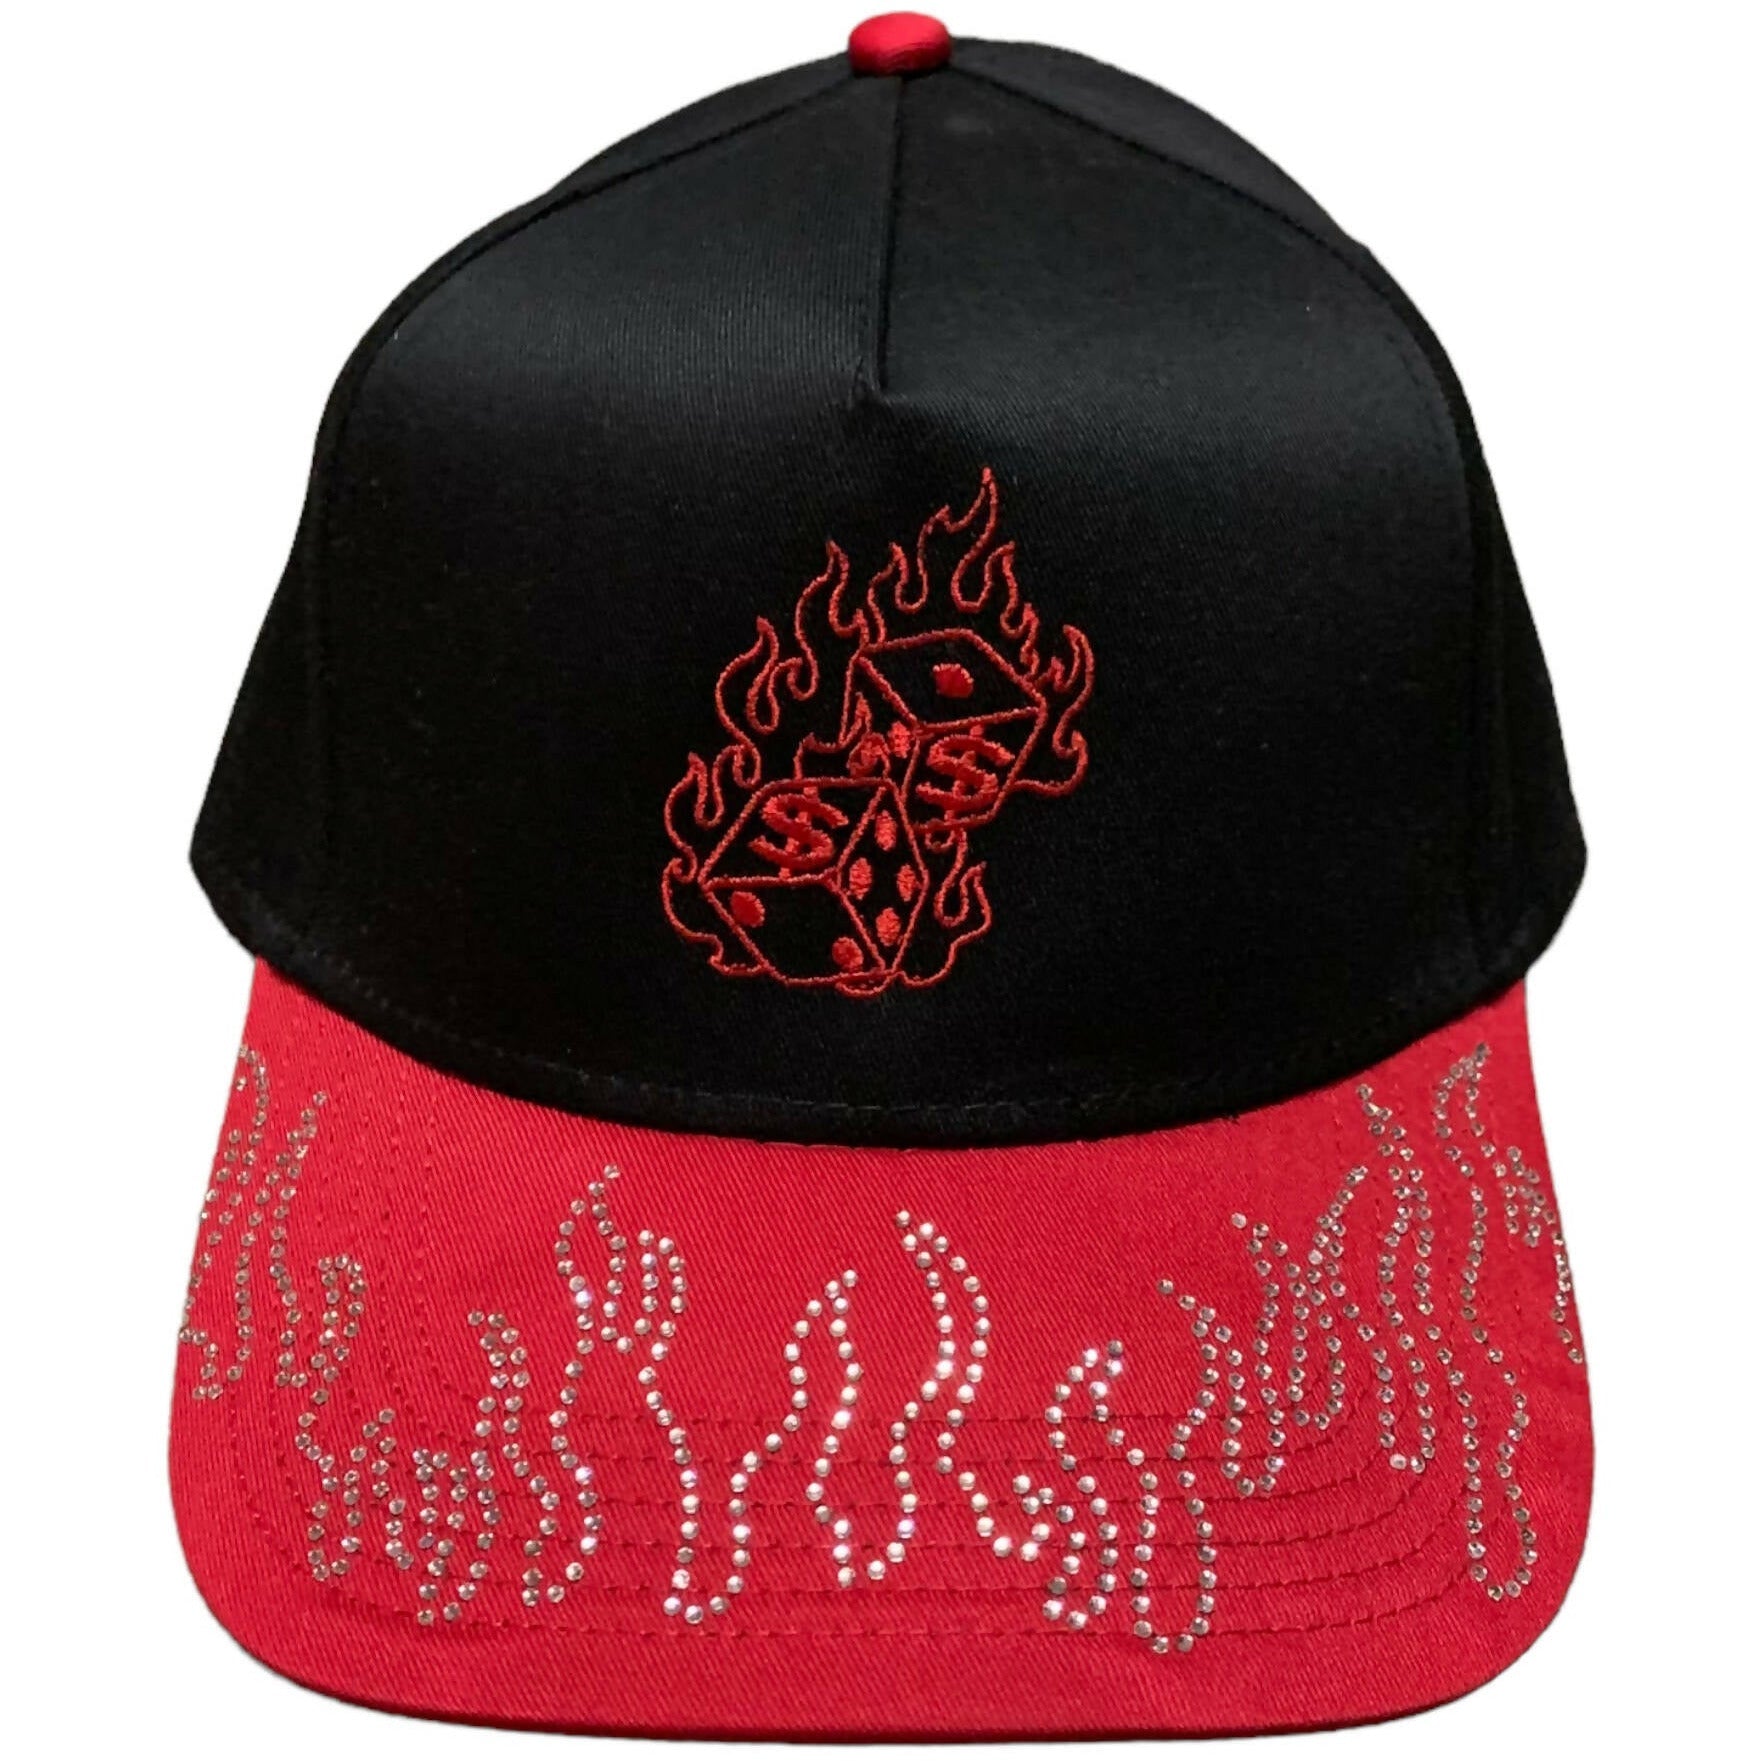 "Roll the Dice" Red $napback hat